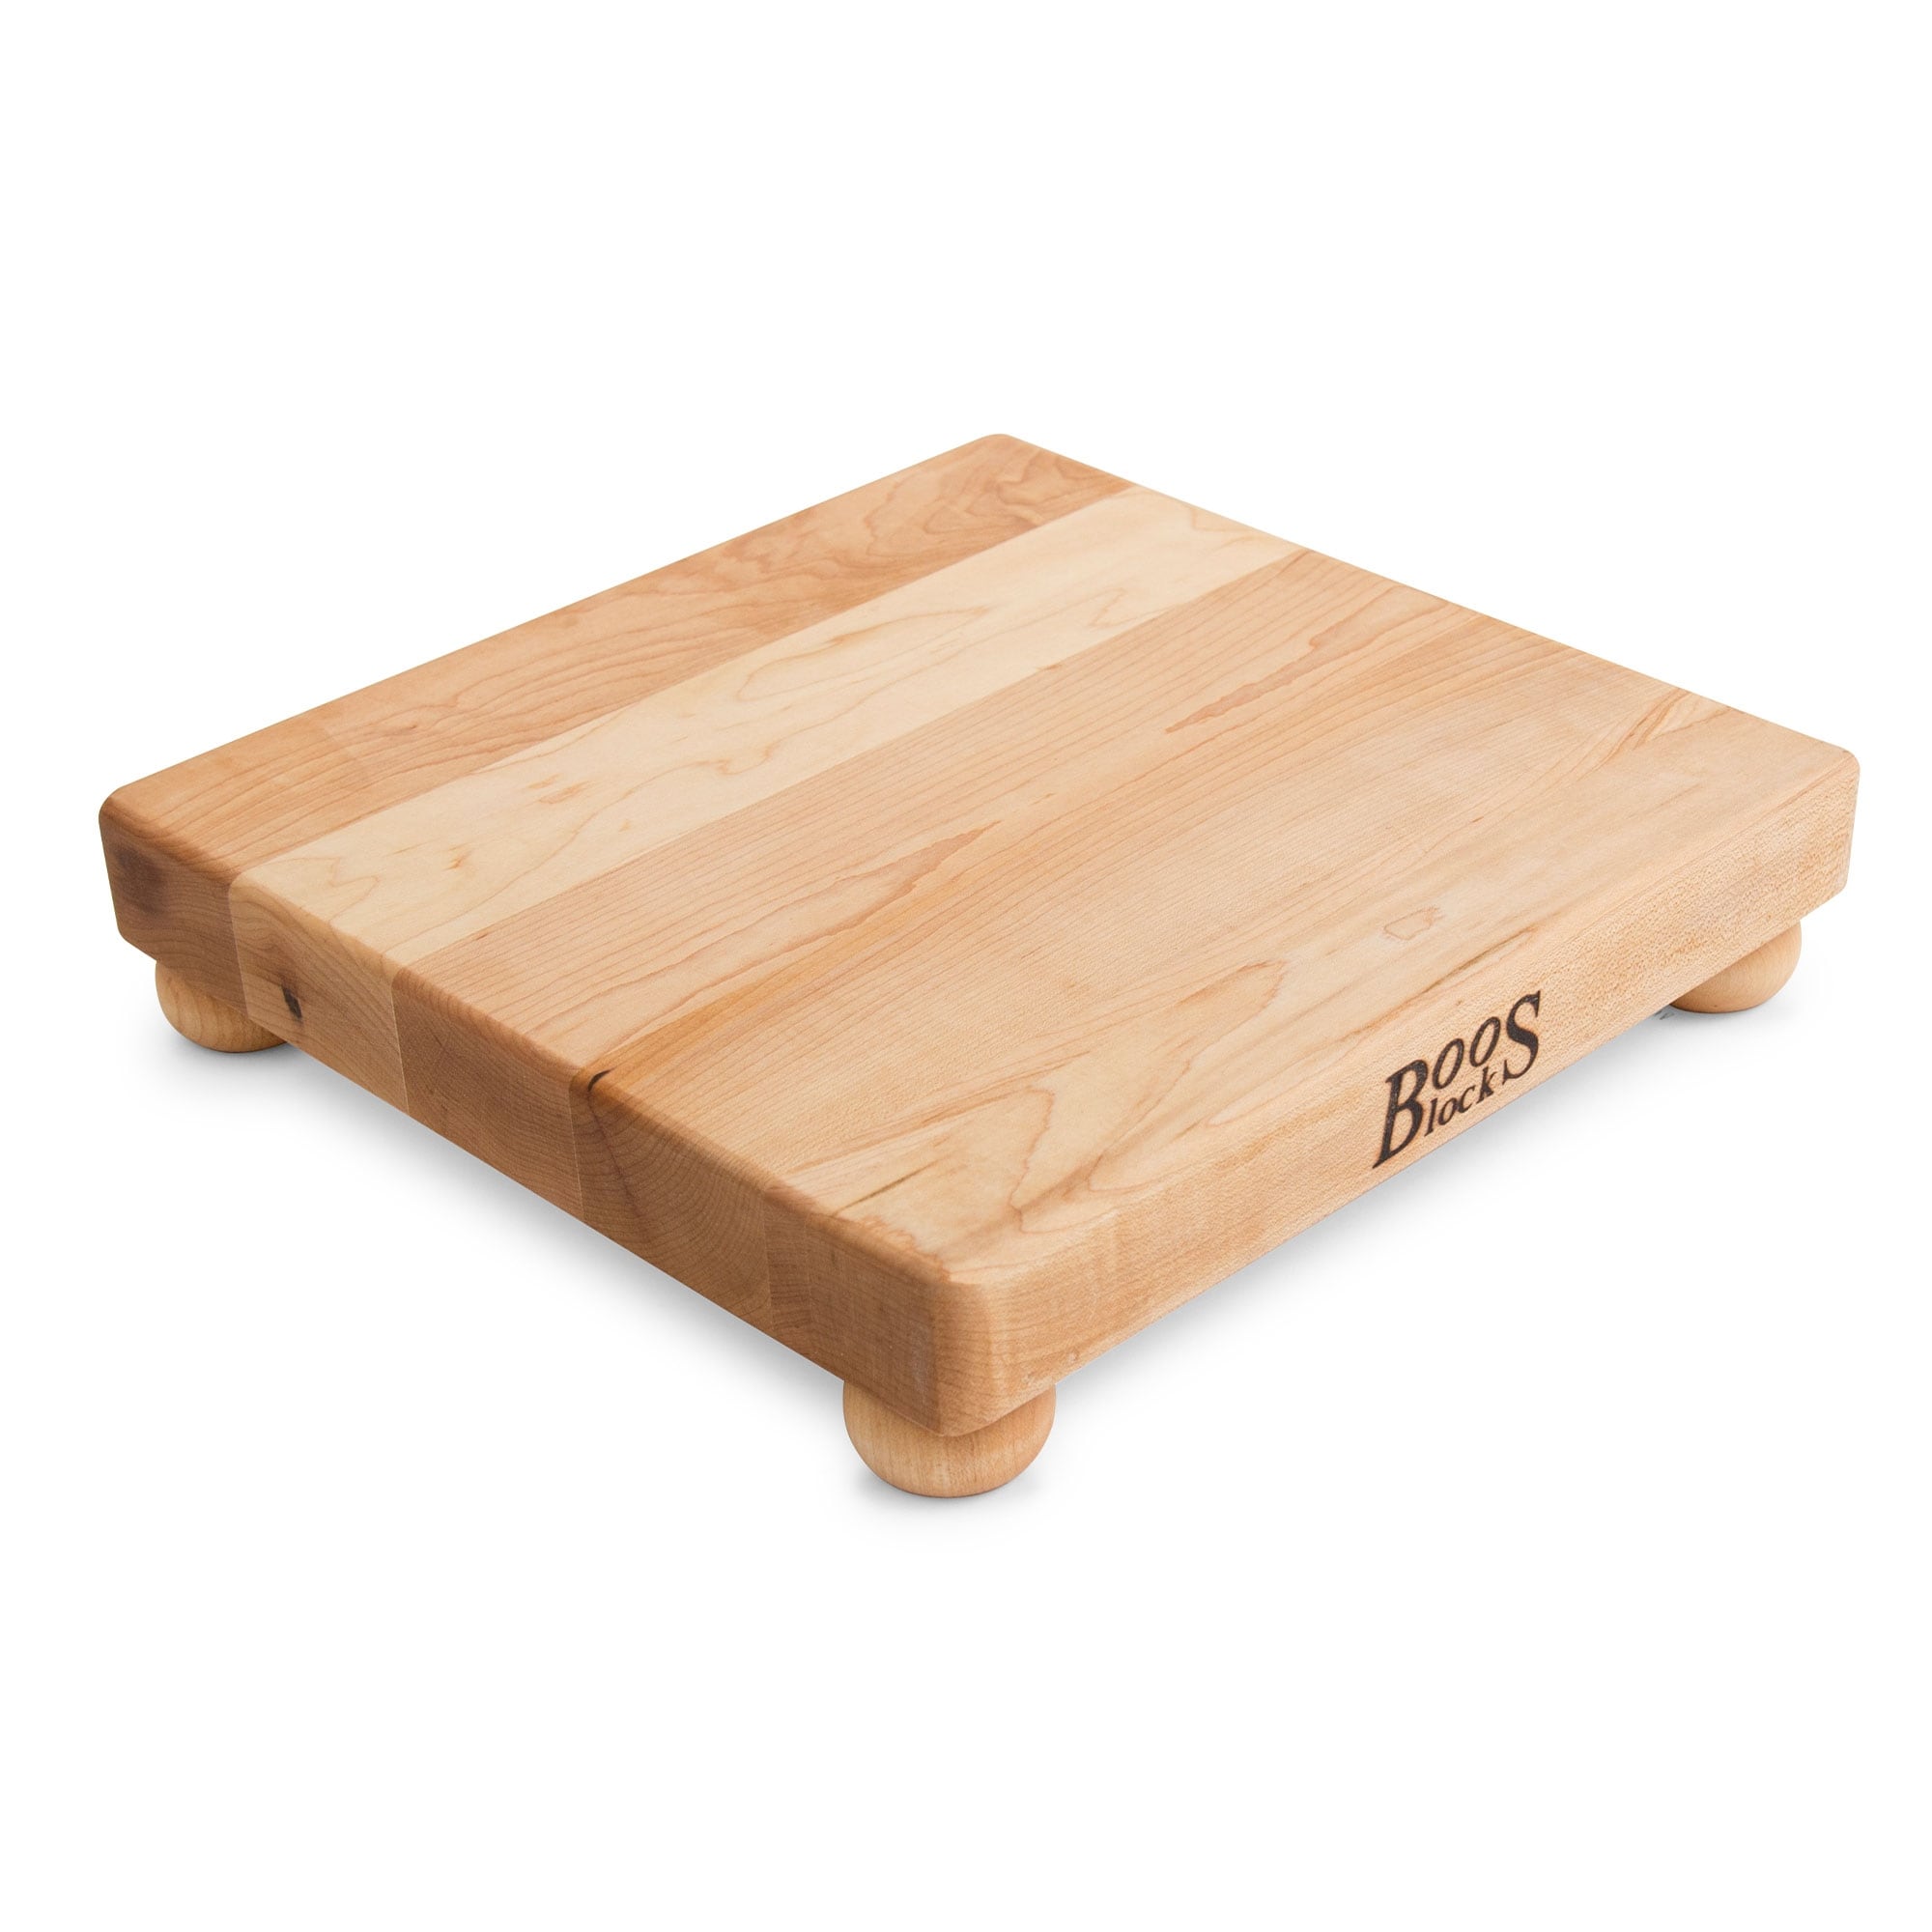 https://ak1.ostkcdn.com/images/products/is/images/direct/c43183964e7c7007c1e3e3078315a39edb8bd6cf/John-Boos-Small-Maple-Wood-Edge-Grain-Cutting-Board-for-Kitchen%2C12%22-x-12%22-x-1.5%22.jpg